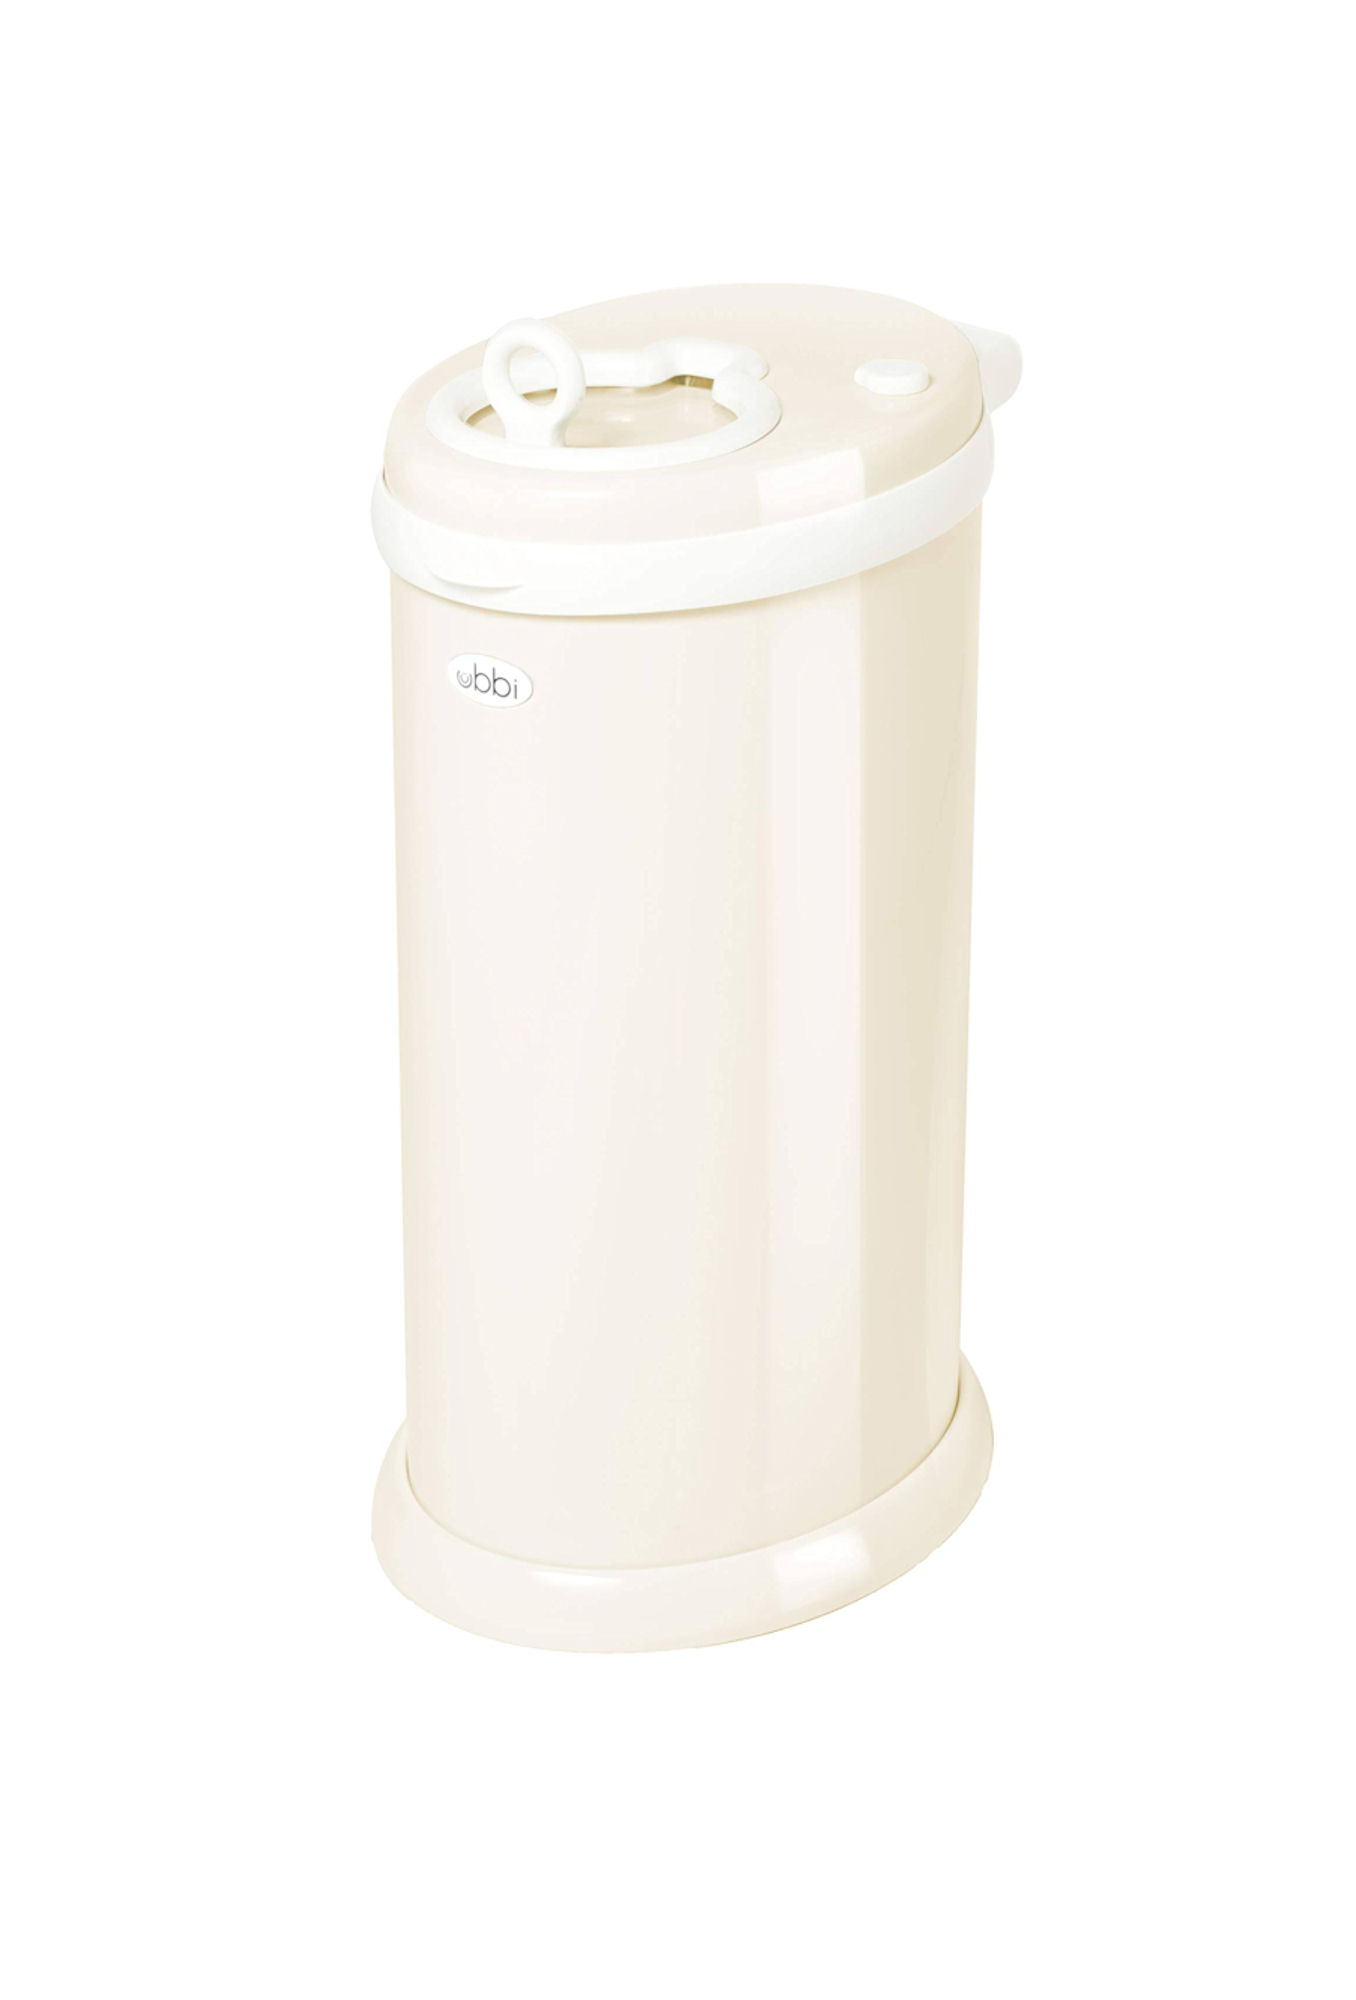 Ubbi Diaper Pail – Everything Baby